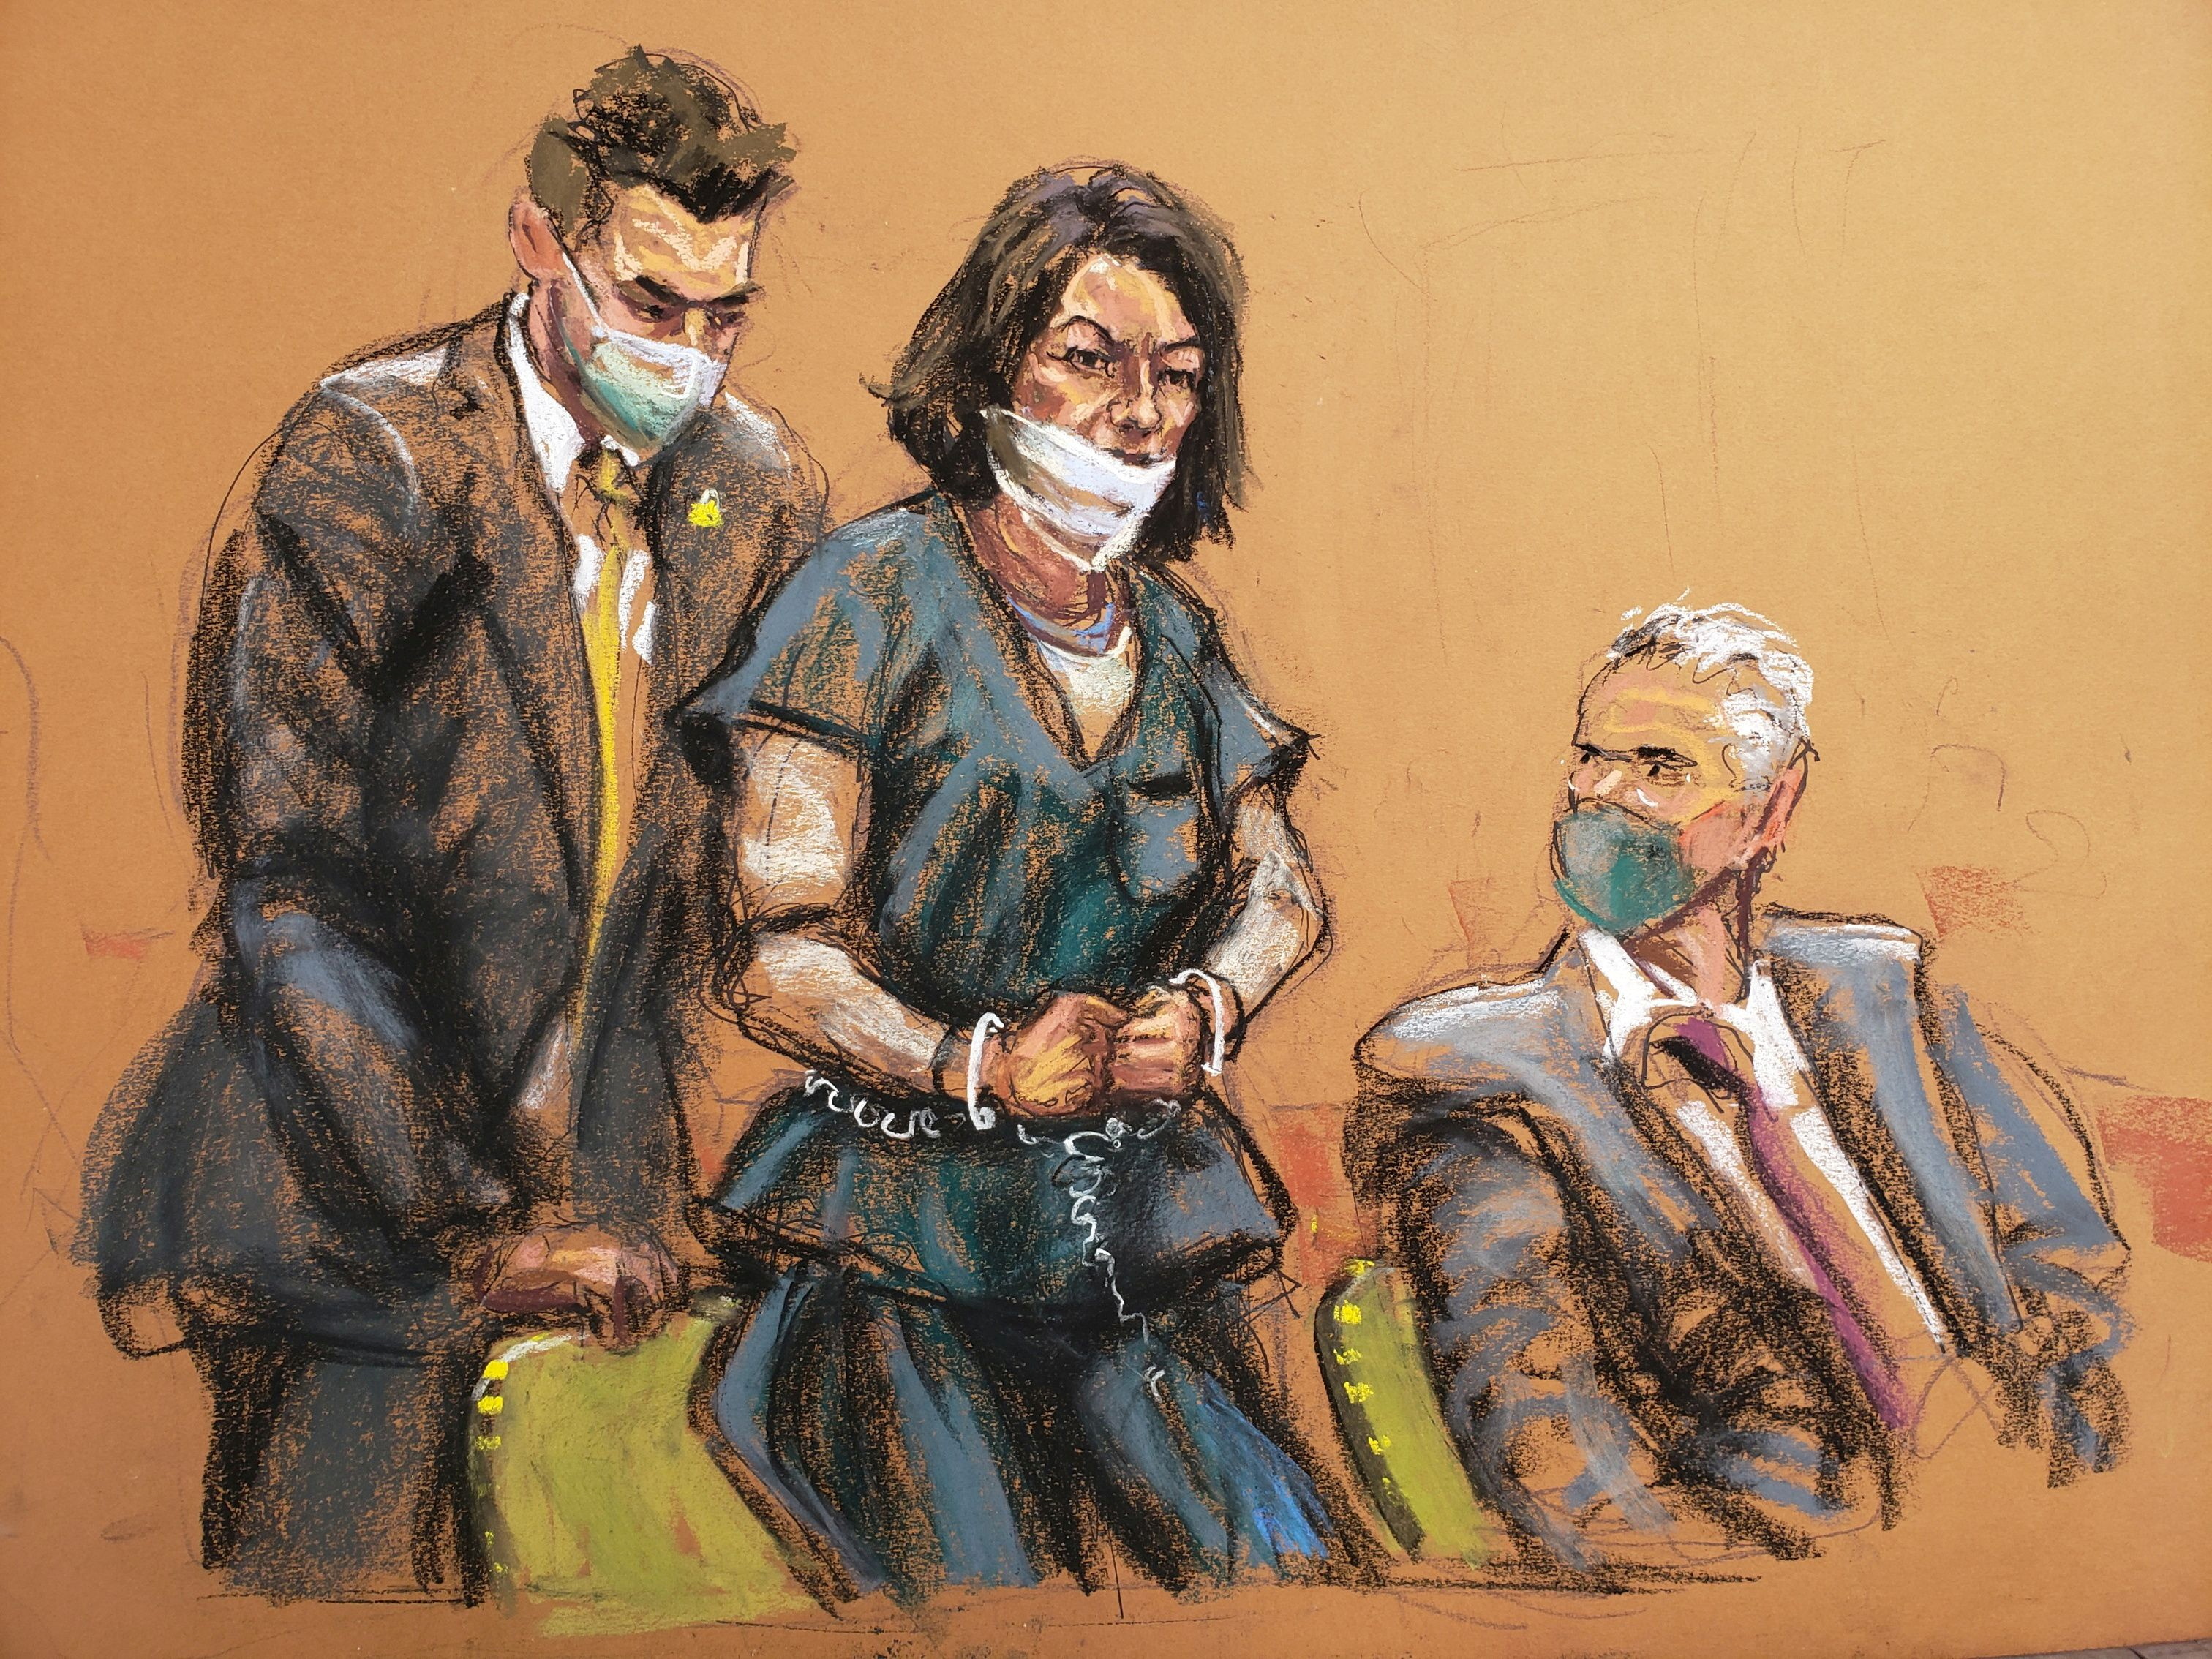 Ghislaine Maxwell, the Jeffrey Epstein associate accused of sex trafficking, is led into court in shackles for a pre-trial hearing ahead of jury selection, expected to begin later in the week, in a courtroom sketch in New York City, U.S., November 1, 2021. REUTERS/Jane Rosenberg/File Photo